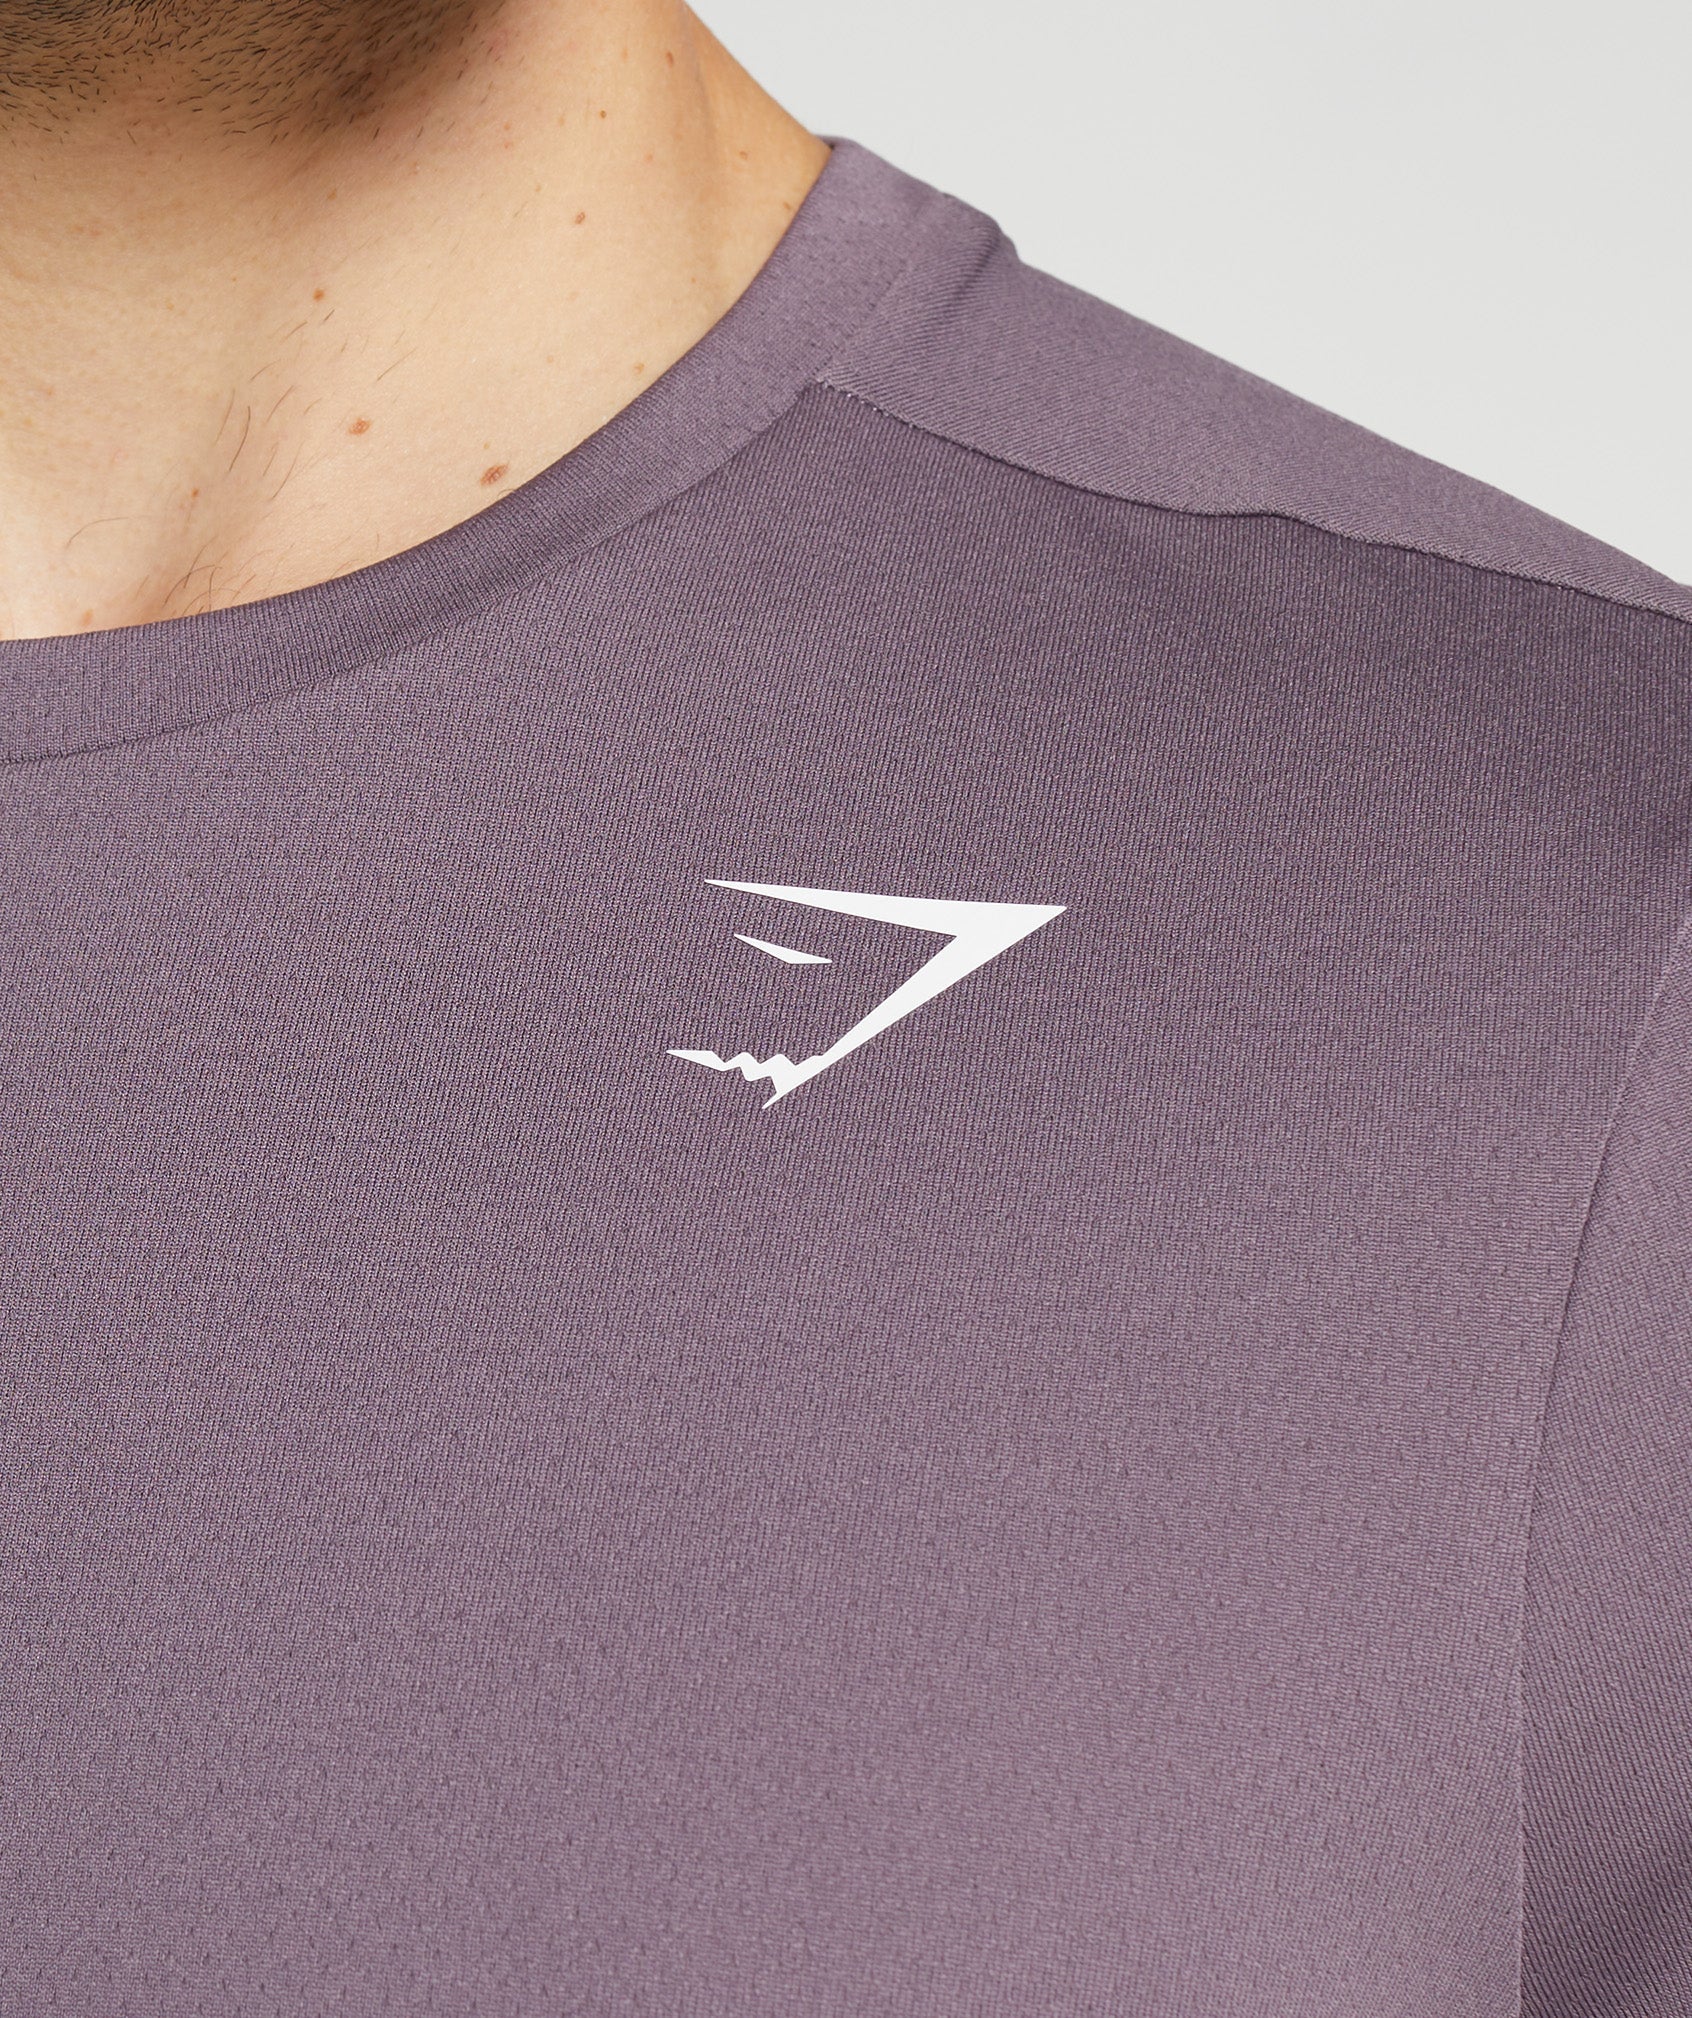 Arrival T-Shirt in Musk Lilac